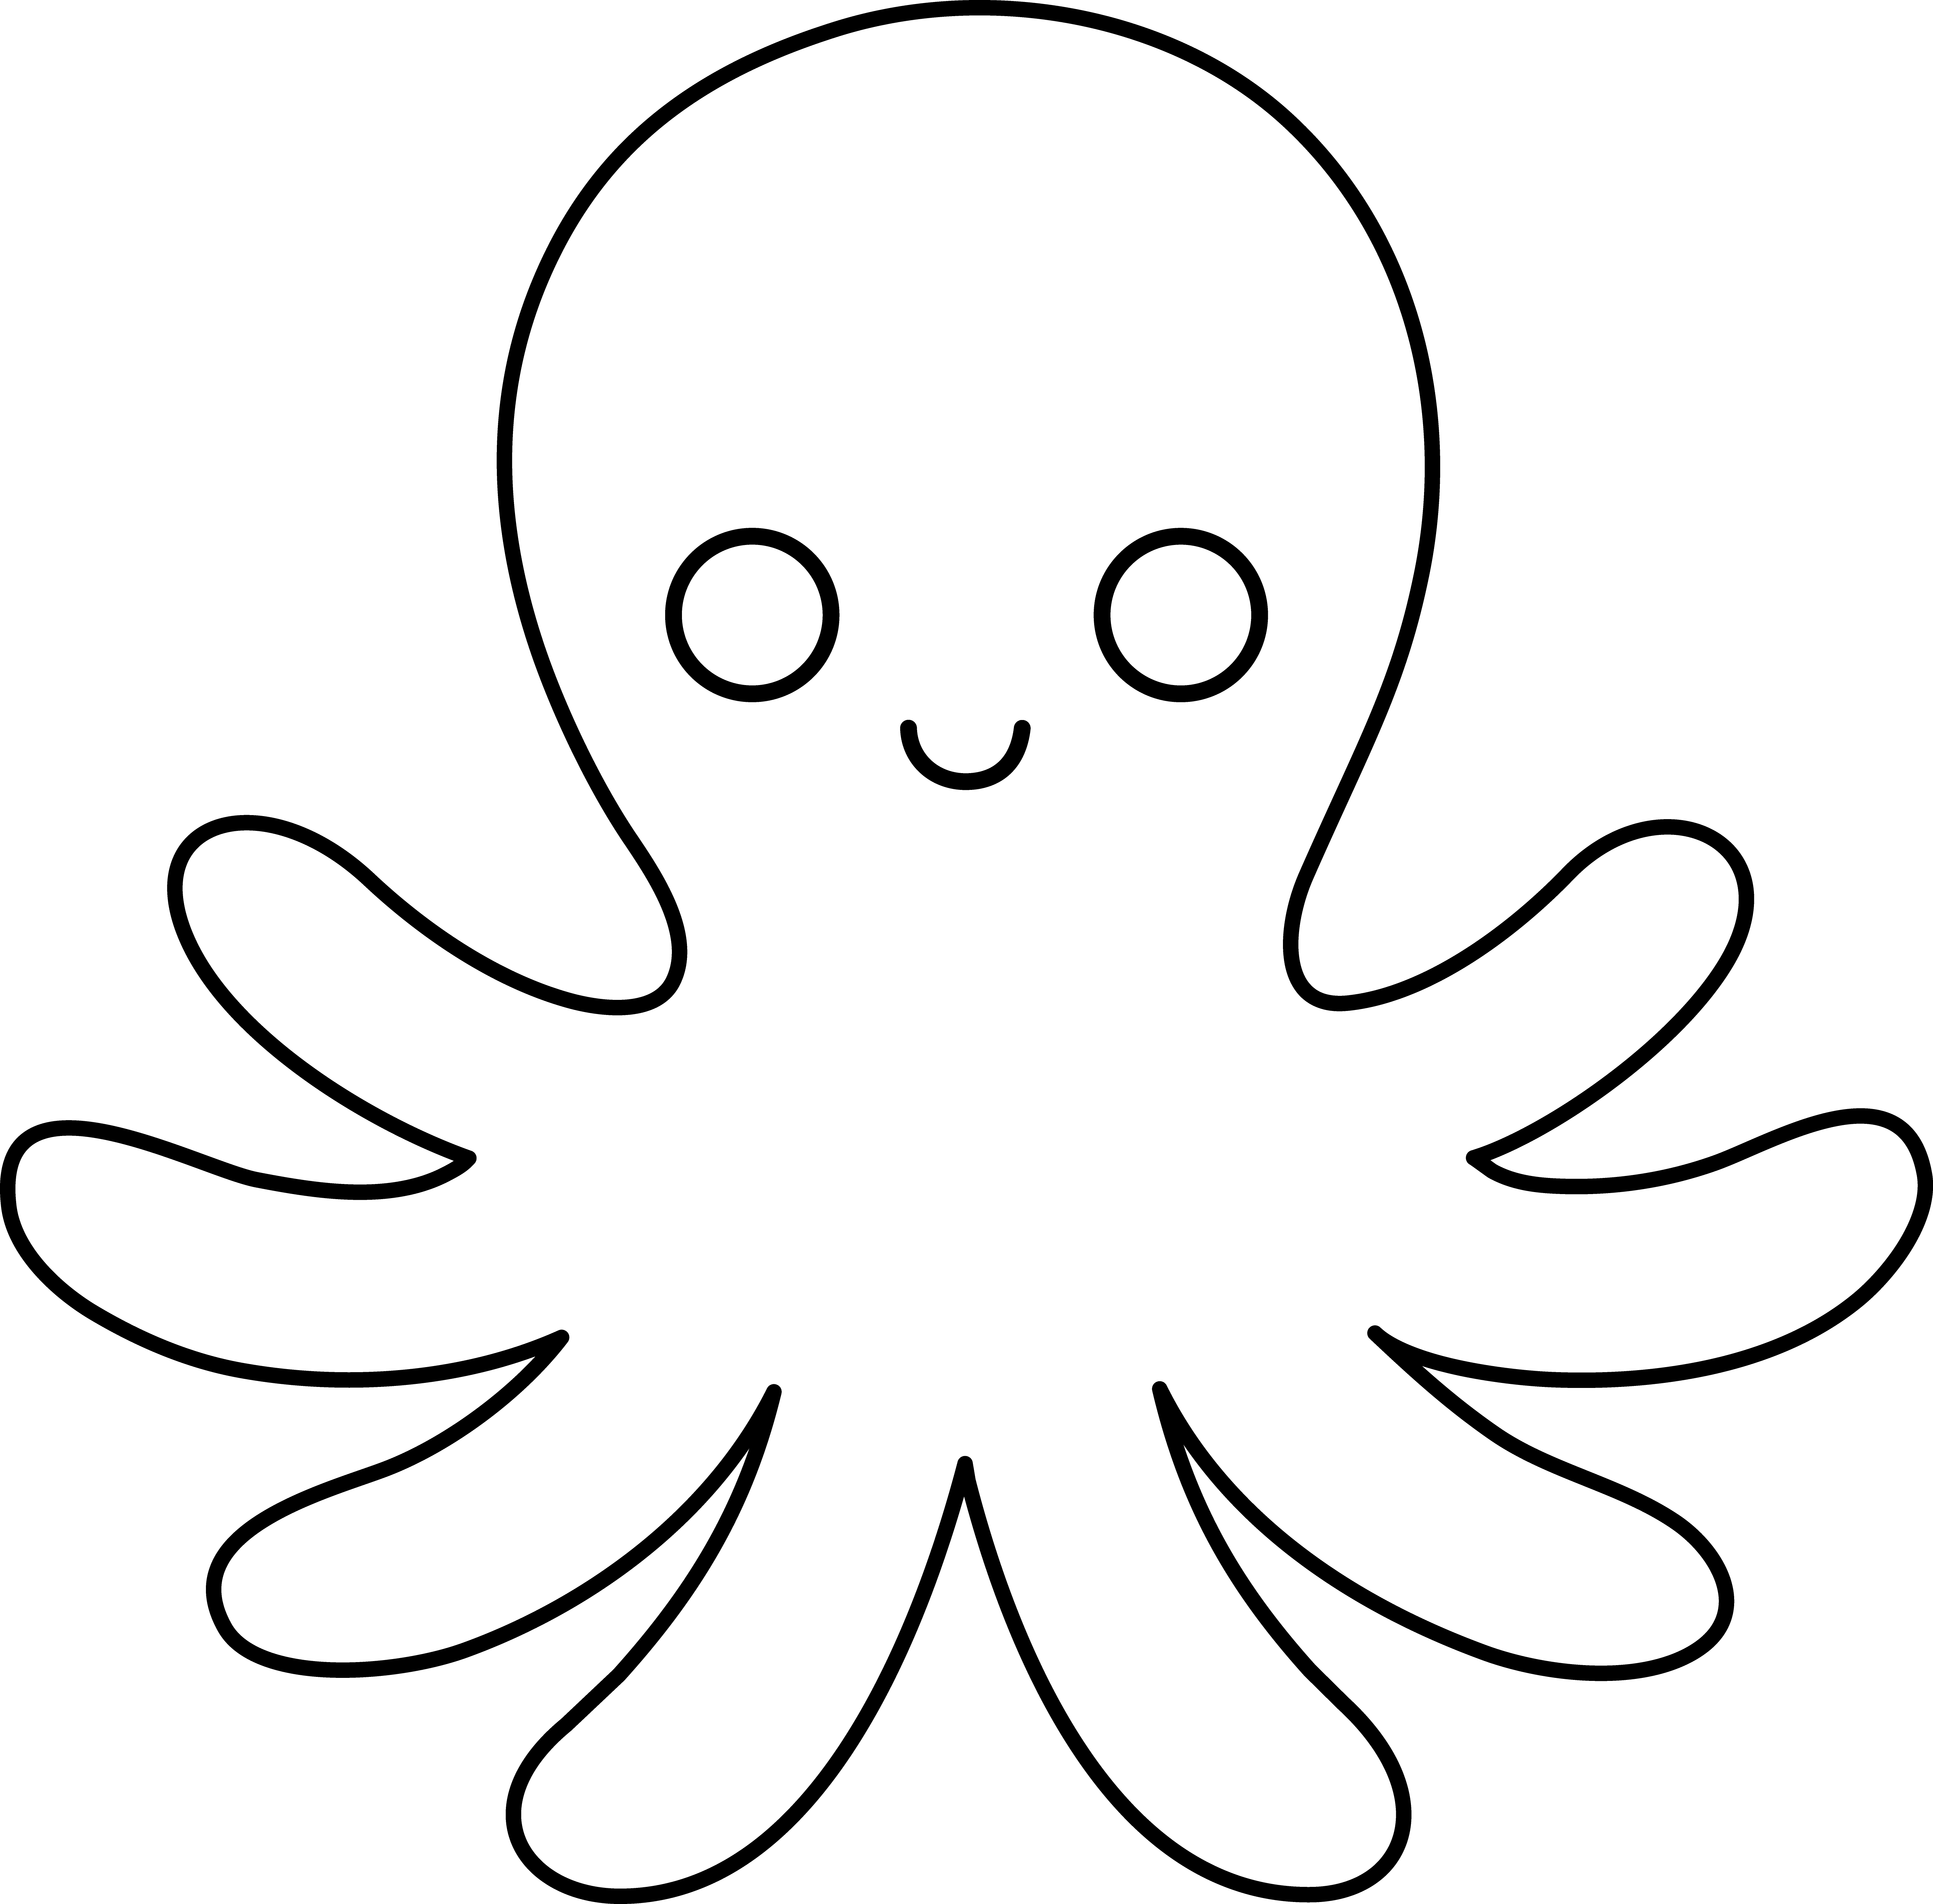 Octopus outline clipartsco.